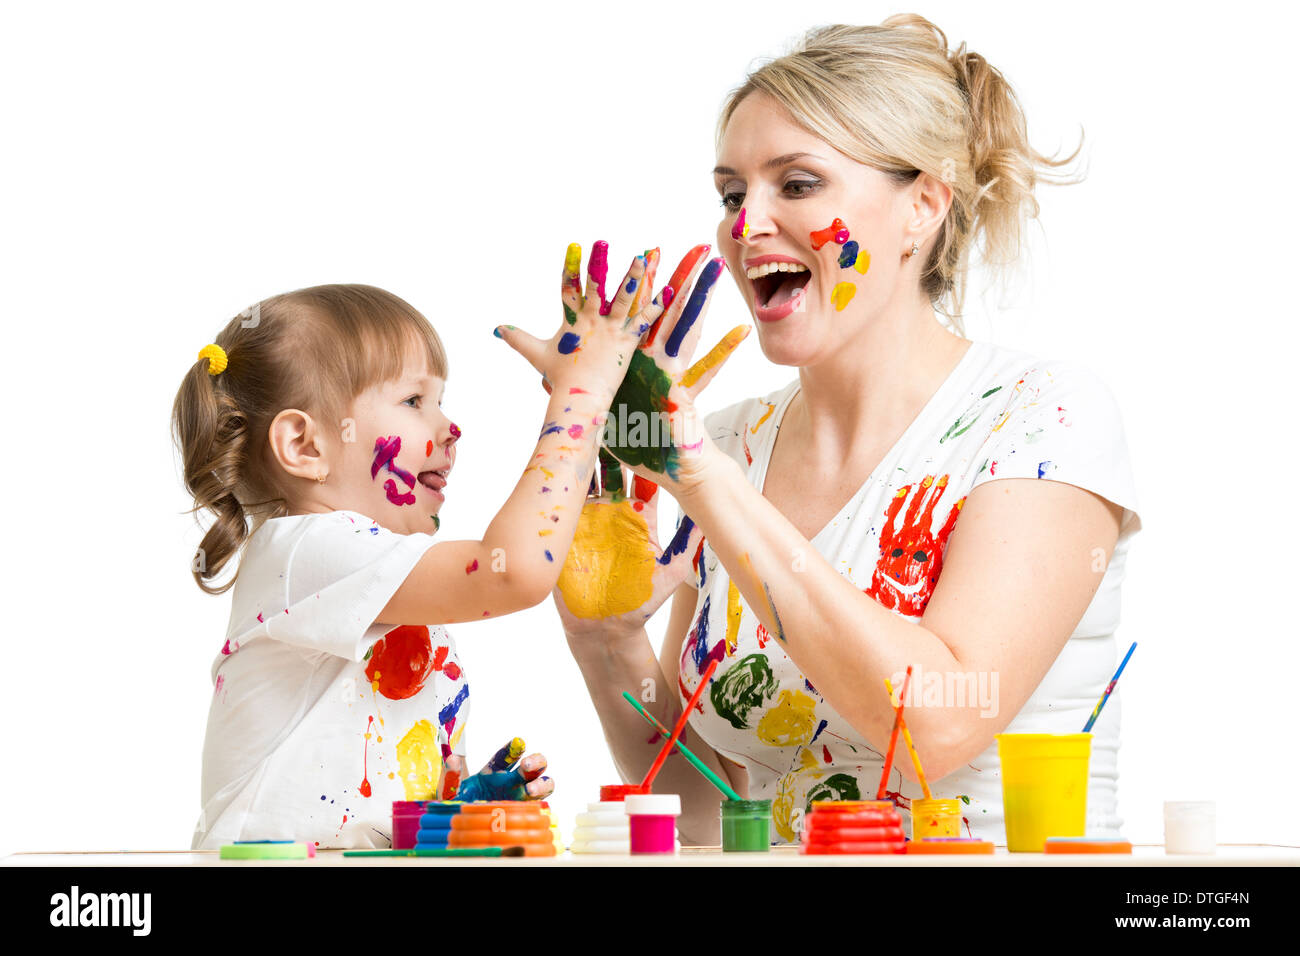 Mother with child paint and have fun pastime Stock Photo